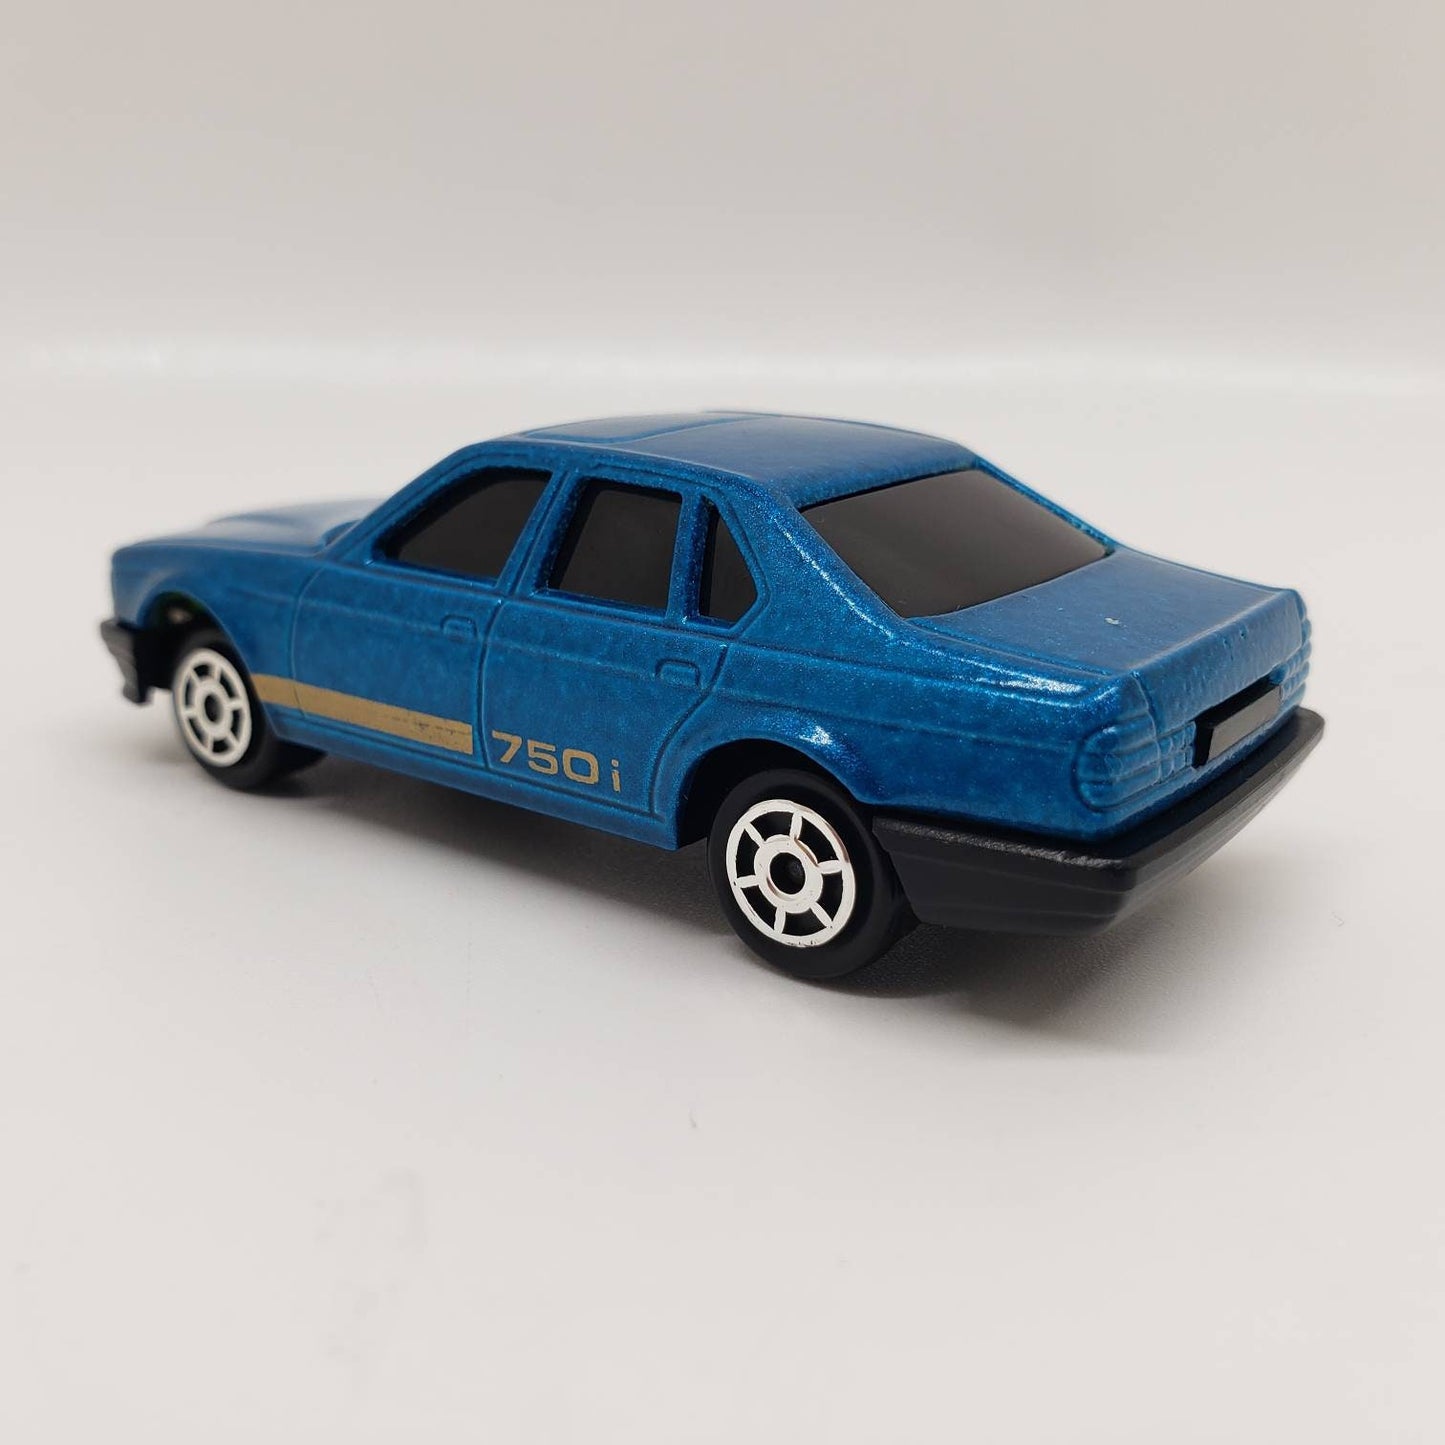 Majorette BMW 750i Blue Sonic Flashers Collectable Miniature Scale Model Toy Car Perfect Birthday Gift